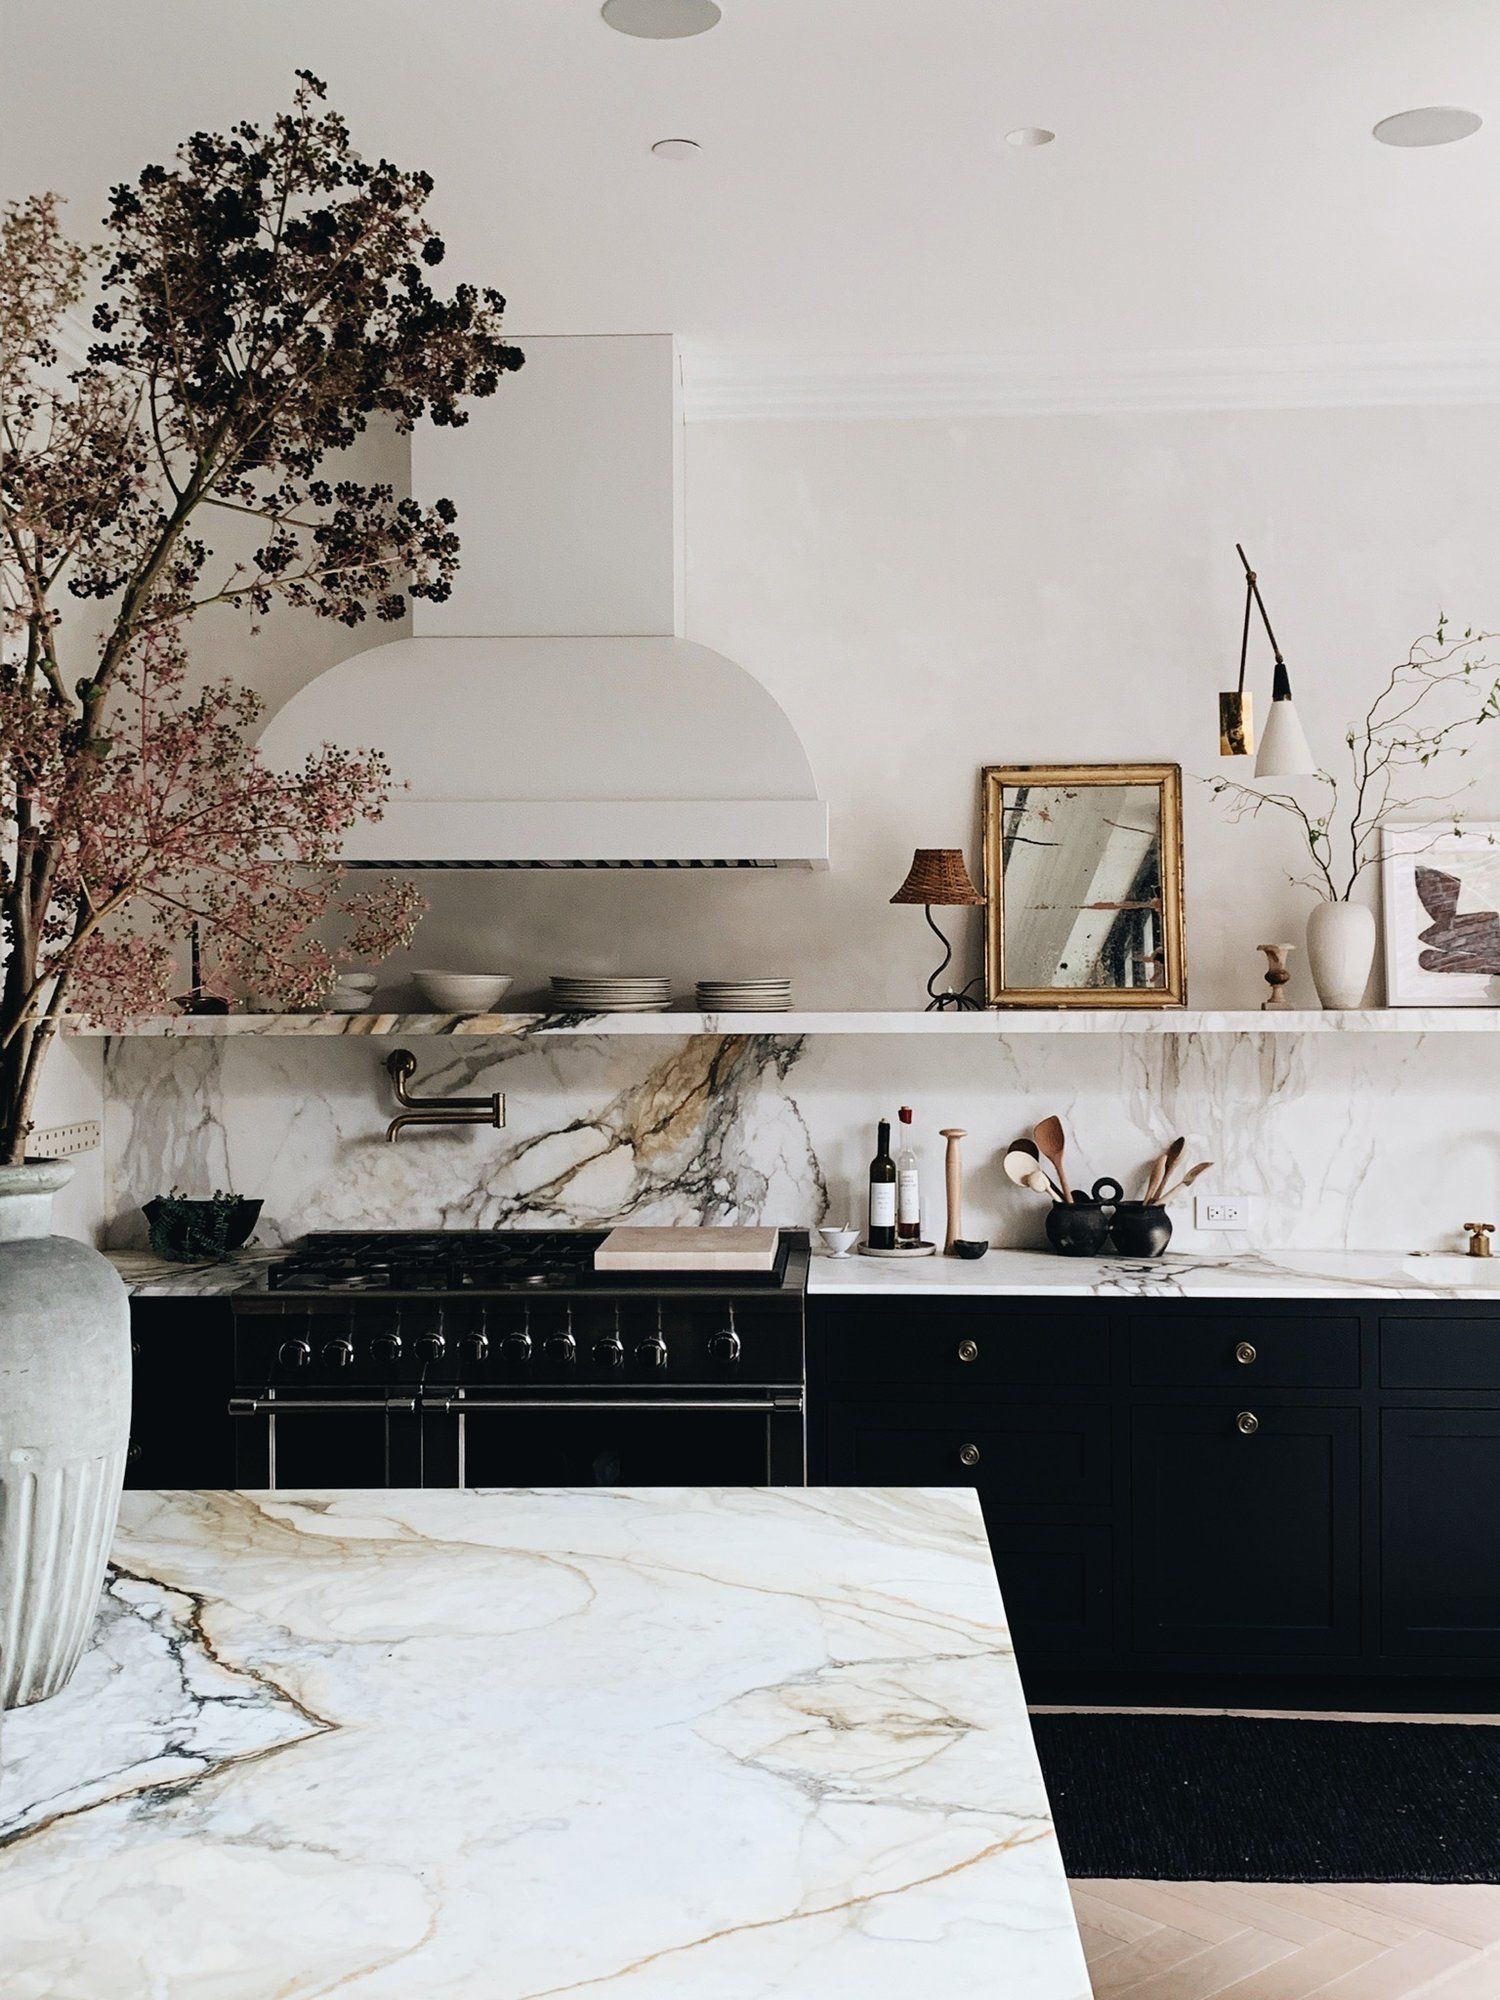 Name to Know: Colin King, a NYC-based Interior Stylist -   21 vintage decor interior design
 ideas